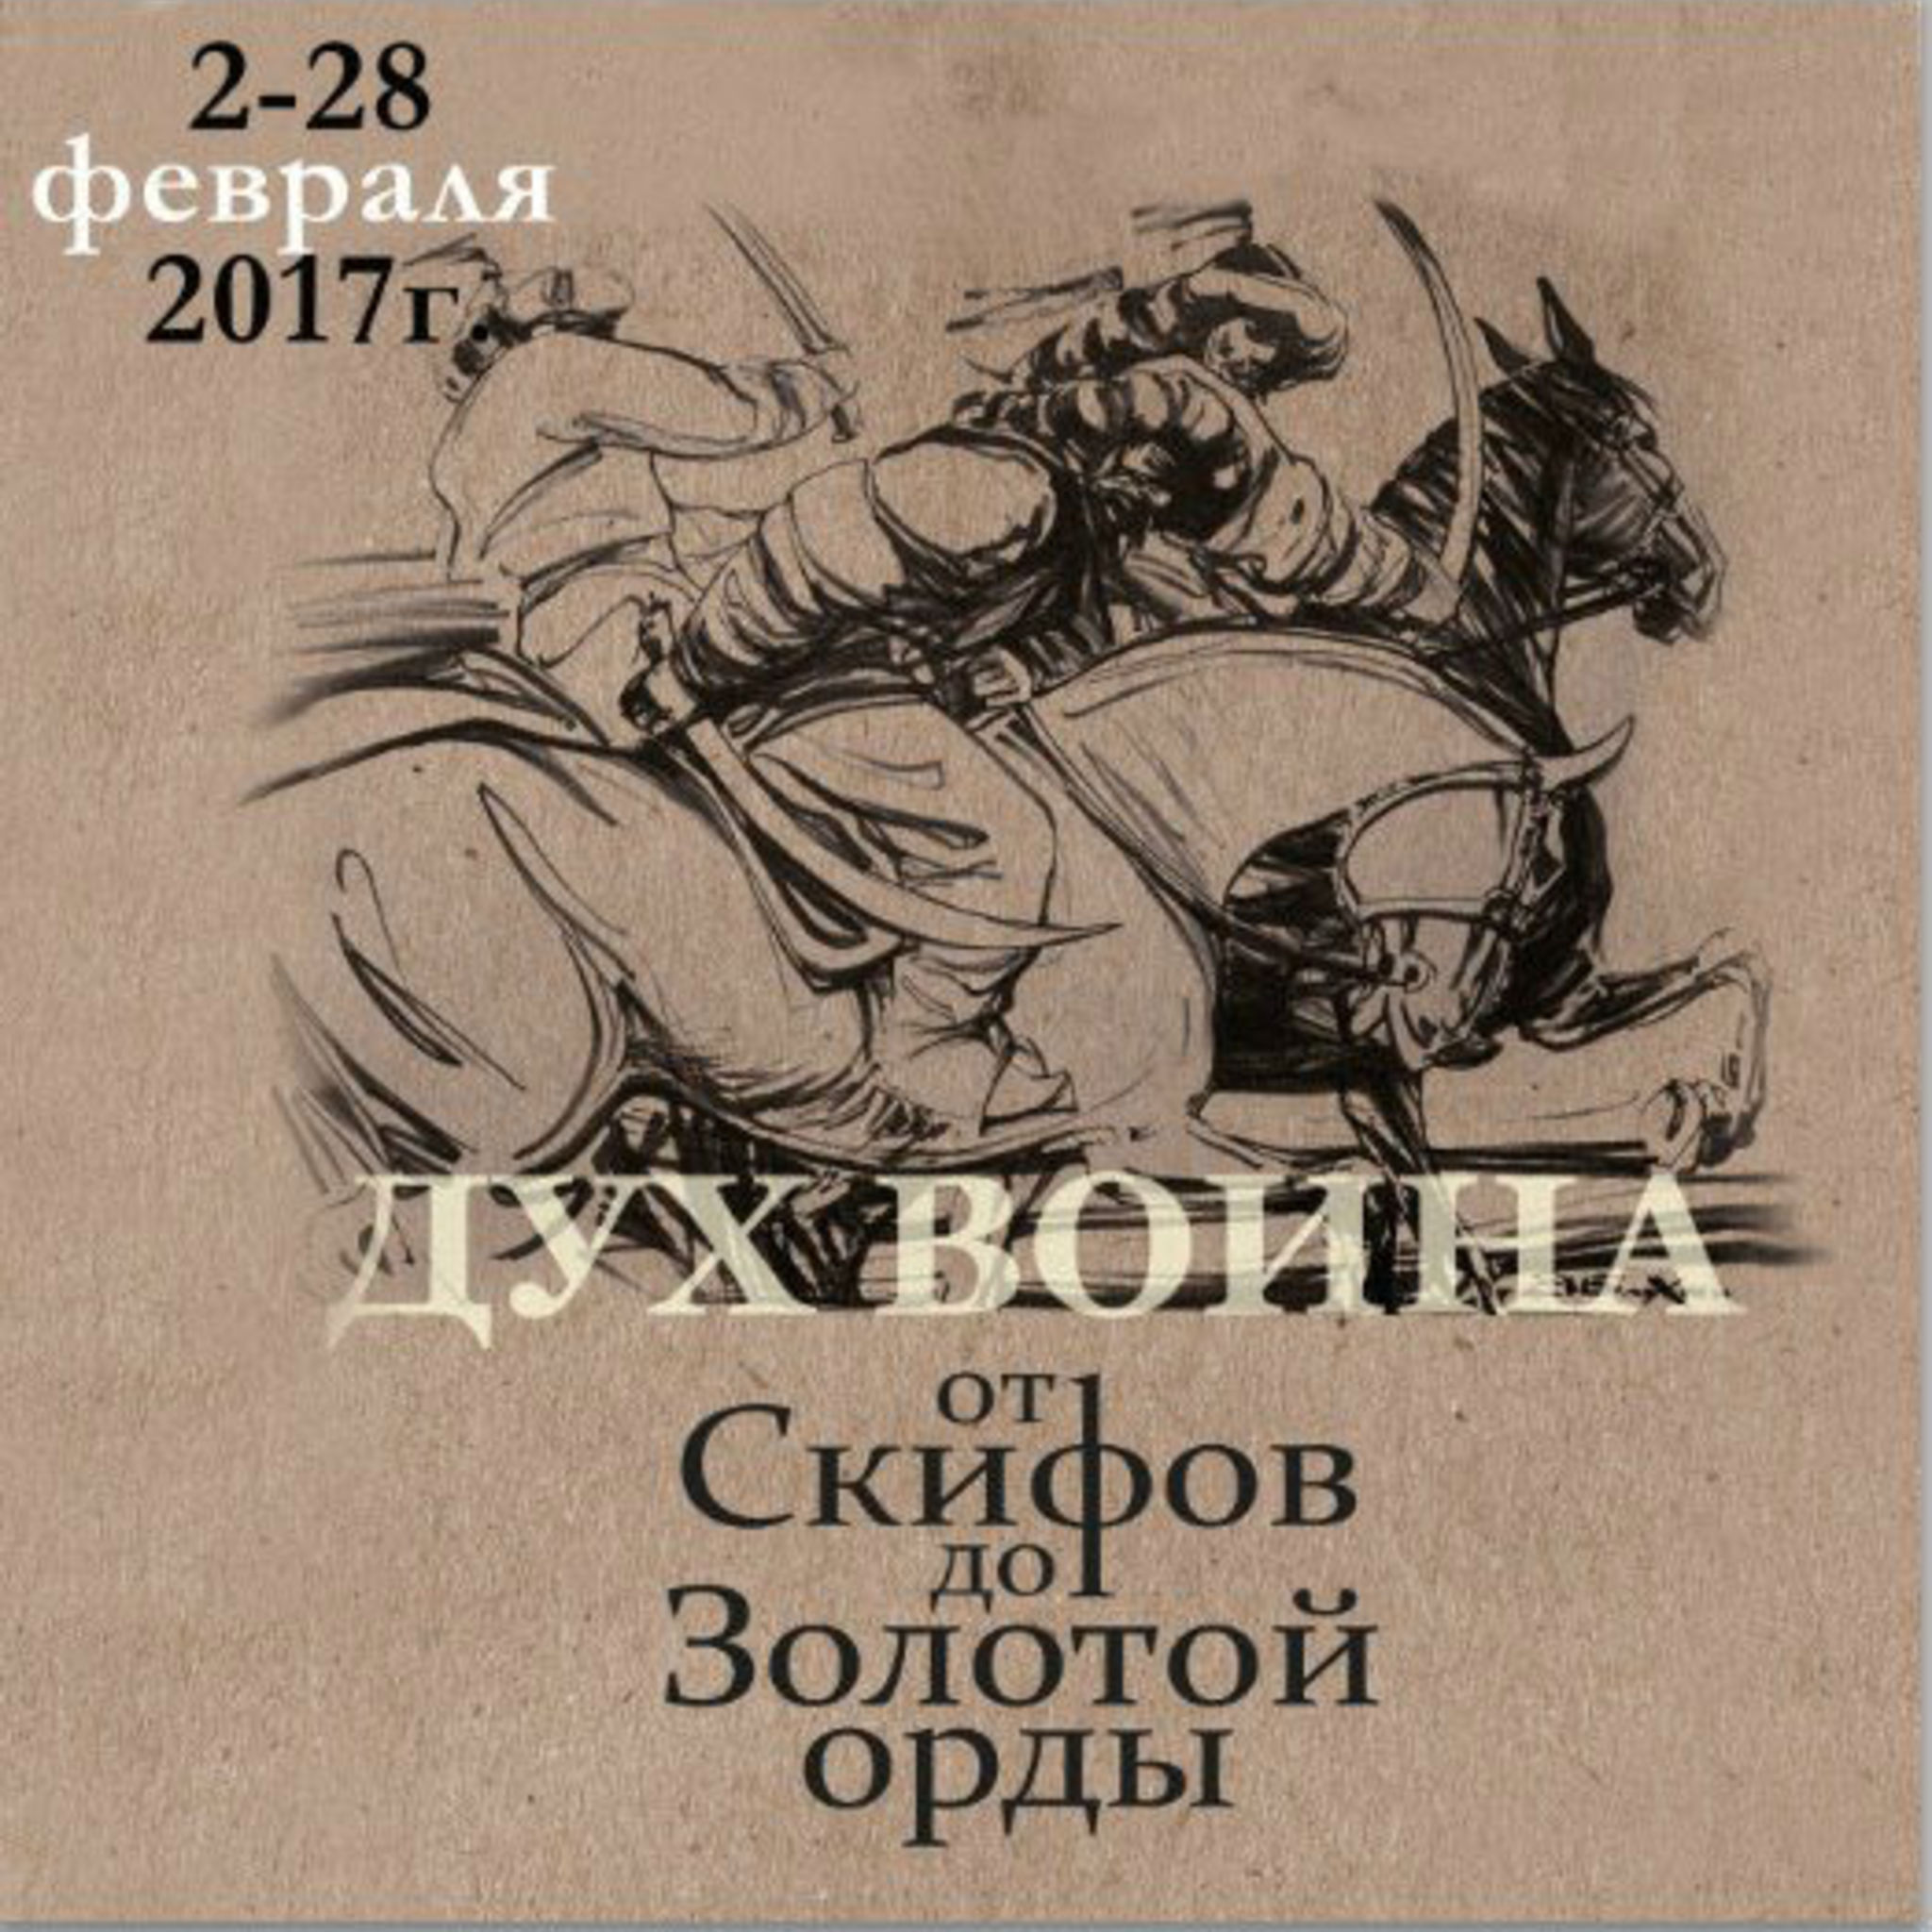 The exhibition The spirit of a warrior from the Scythians to the Golden Horde